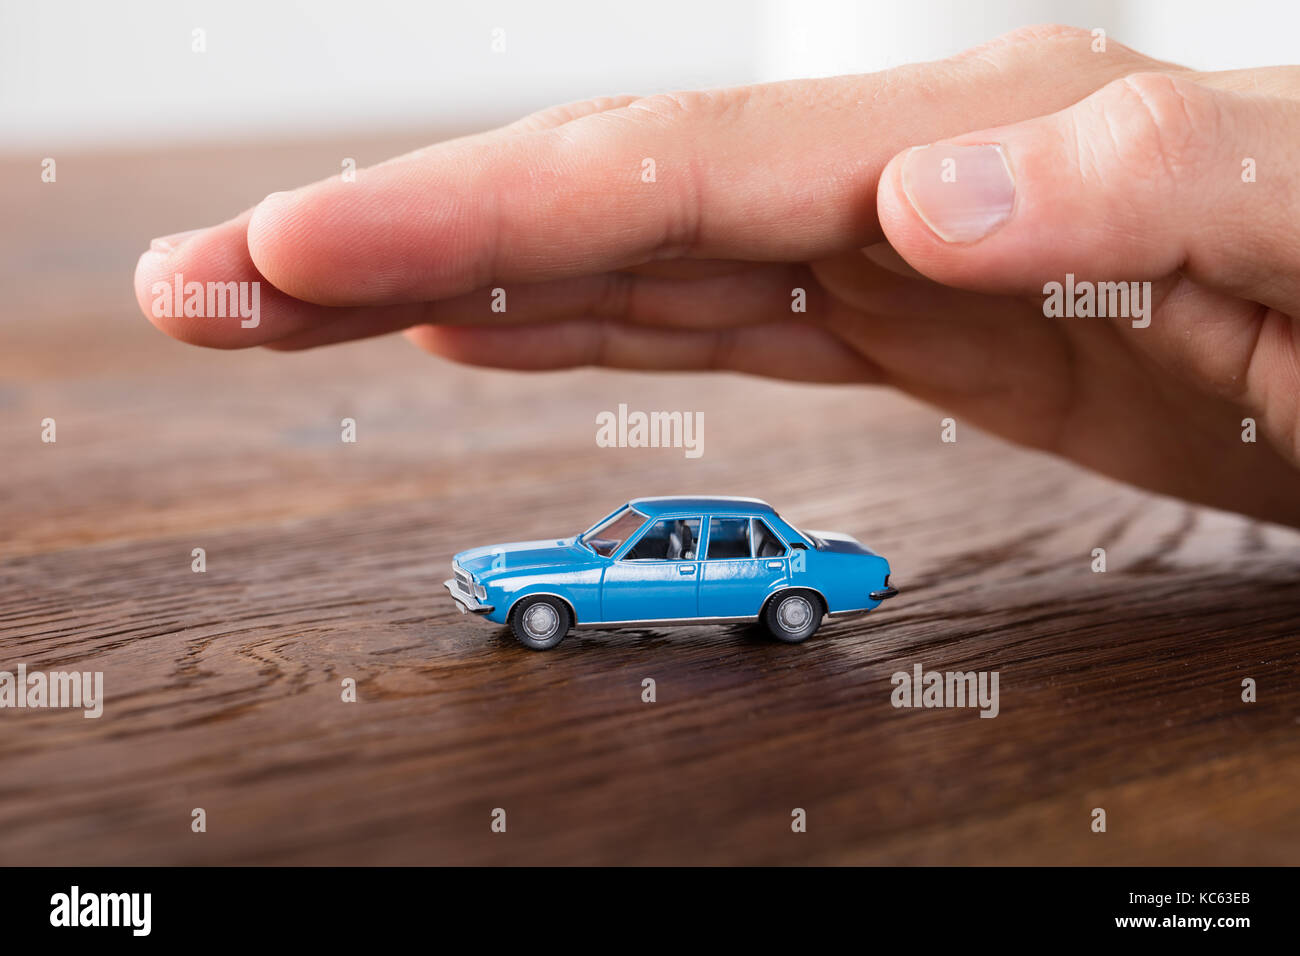 Close-up Of A Car Insurance Concept On Wooden Desk Stock Photo